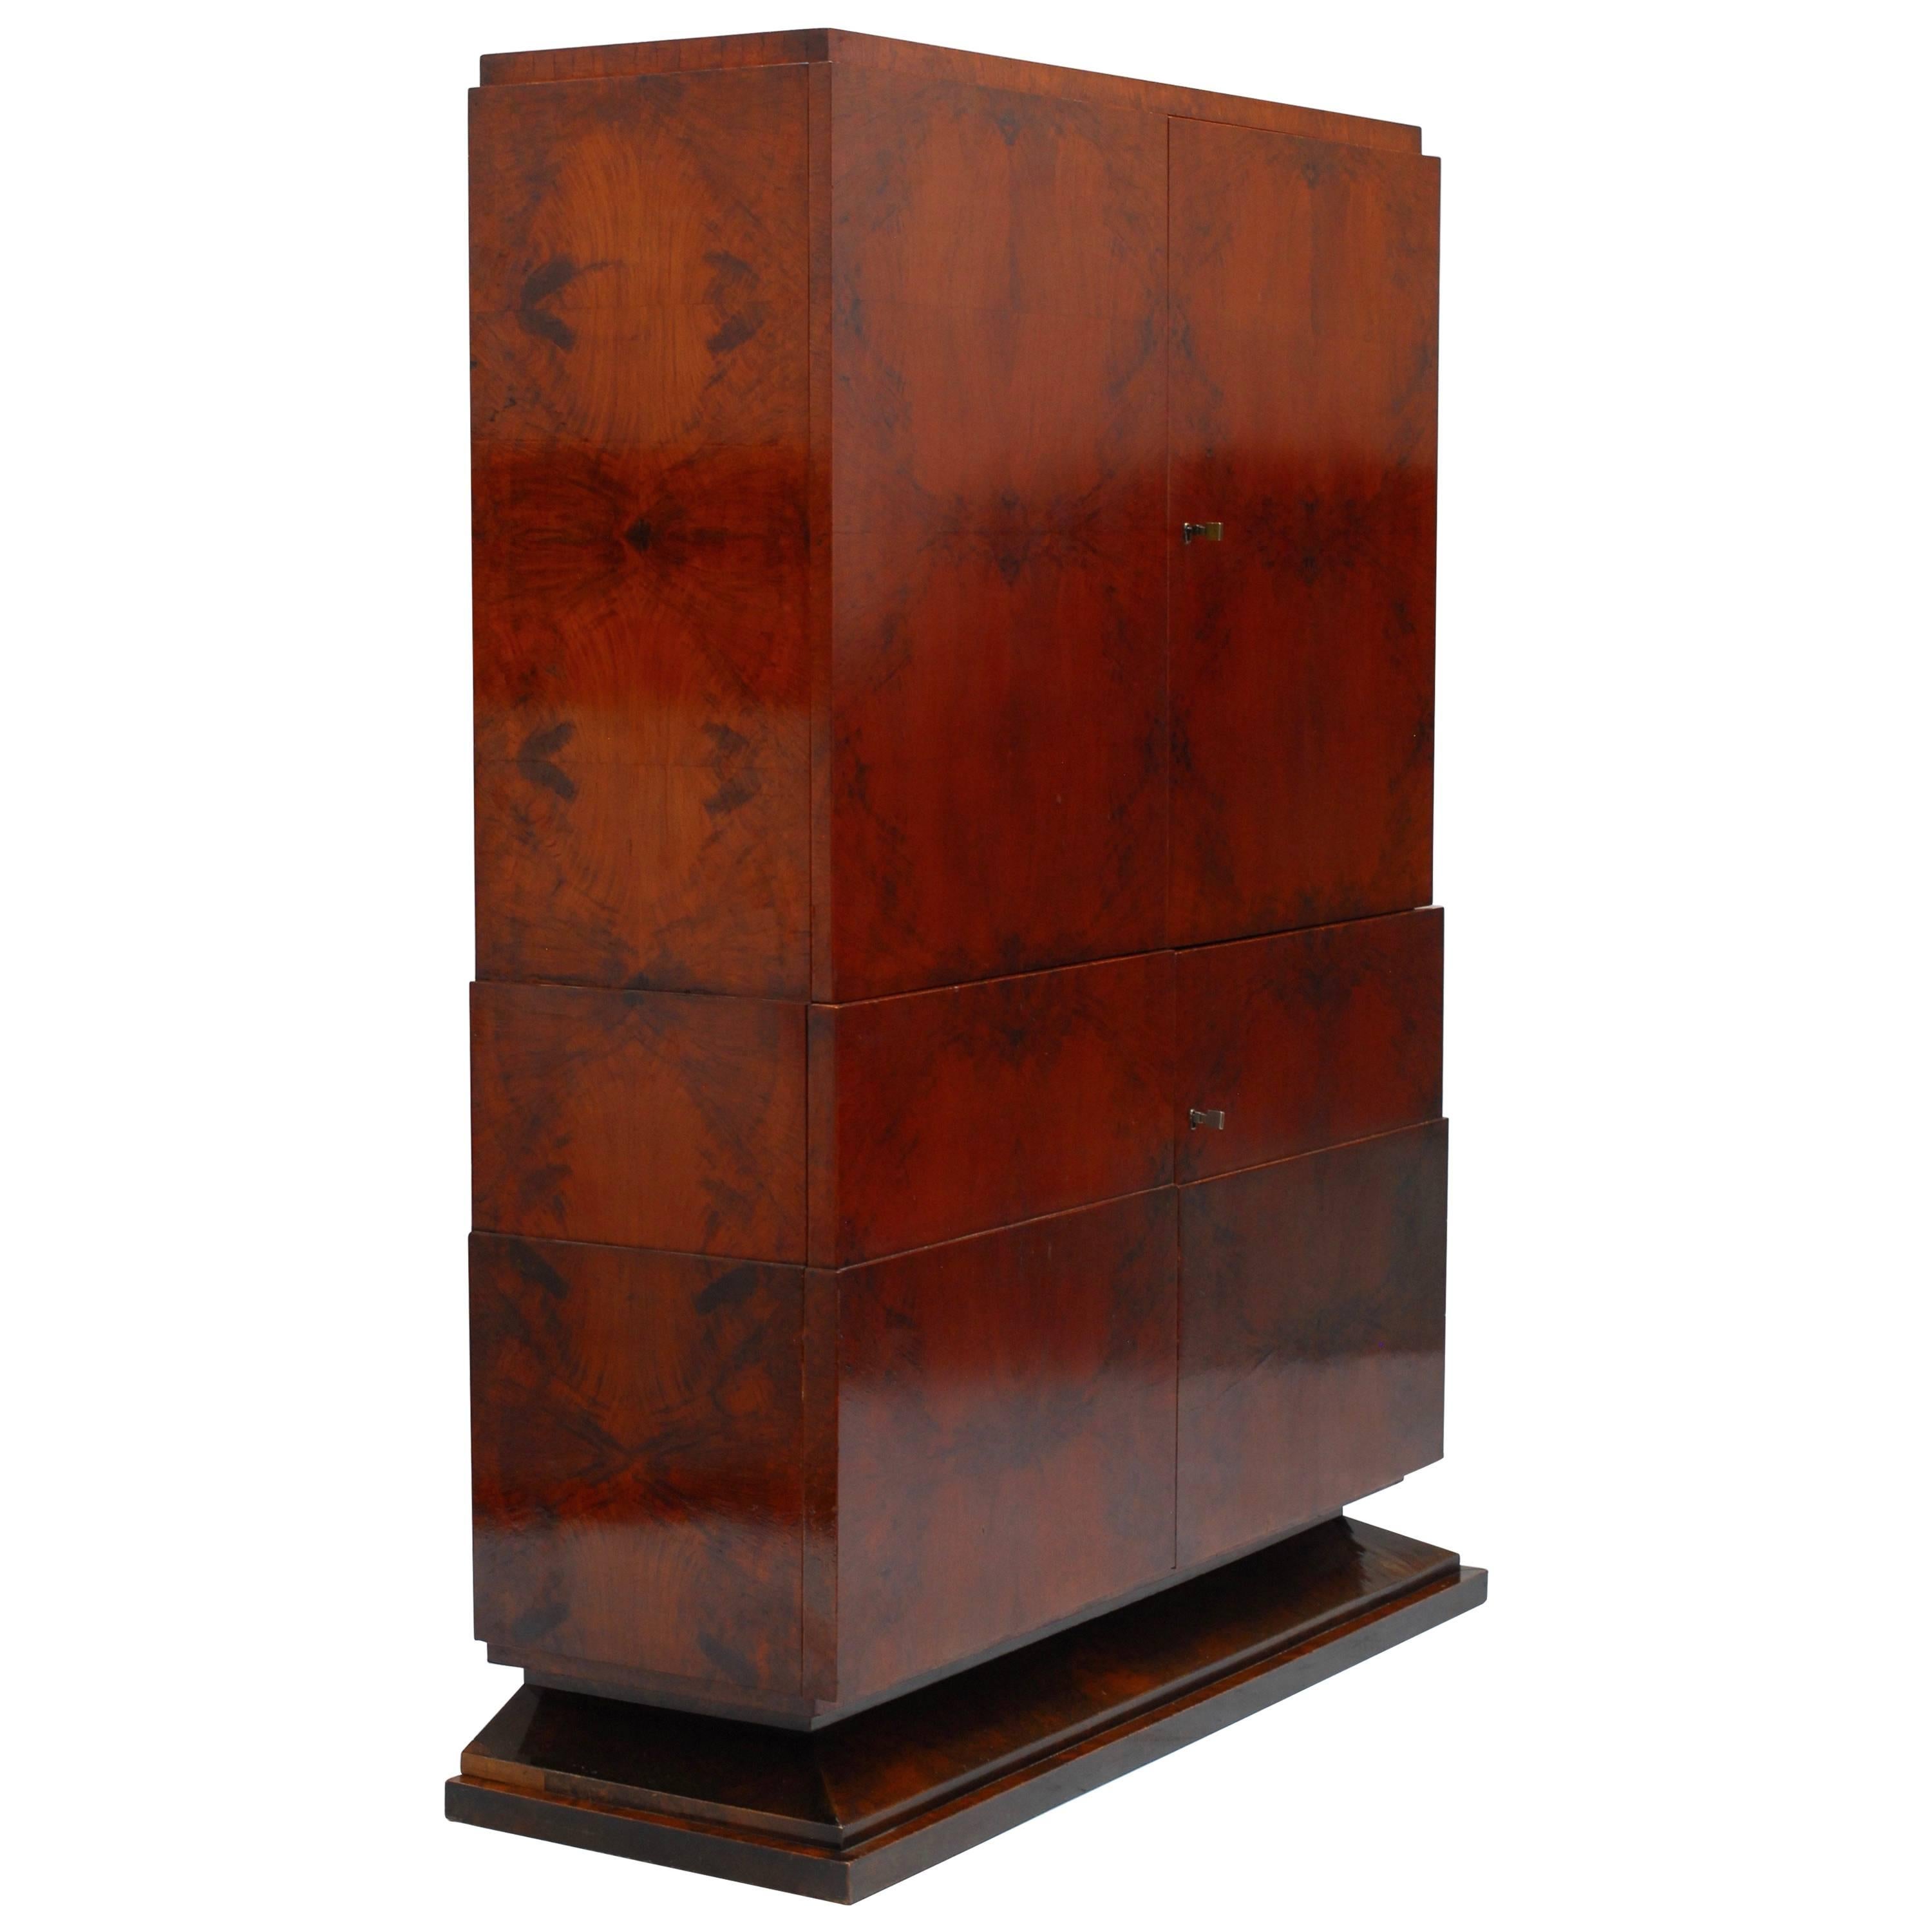 Early Art Deco Modernist Cabinet For Sale